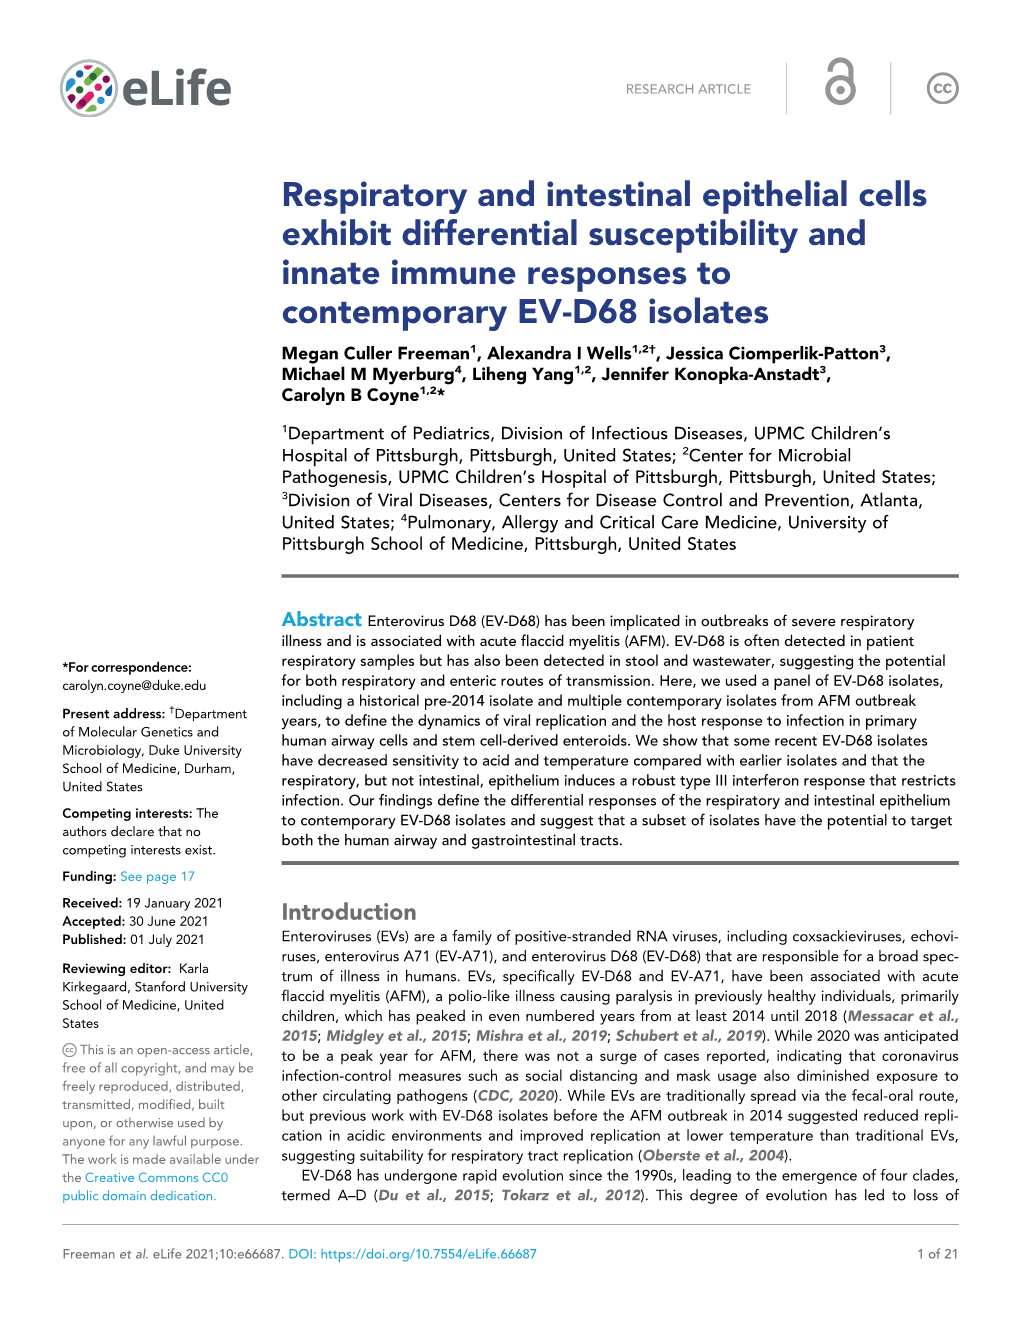 Respiratory and Intestinal Epithelial Cells Exhibit Differential Susceptibility and Innate Immune Responses to Contemporary EV-D